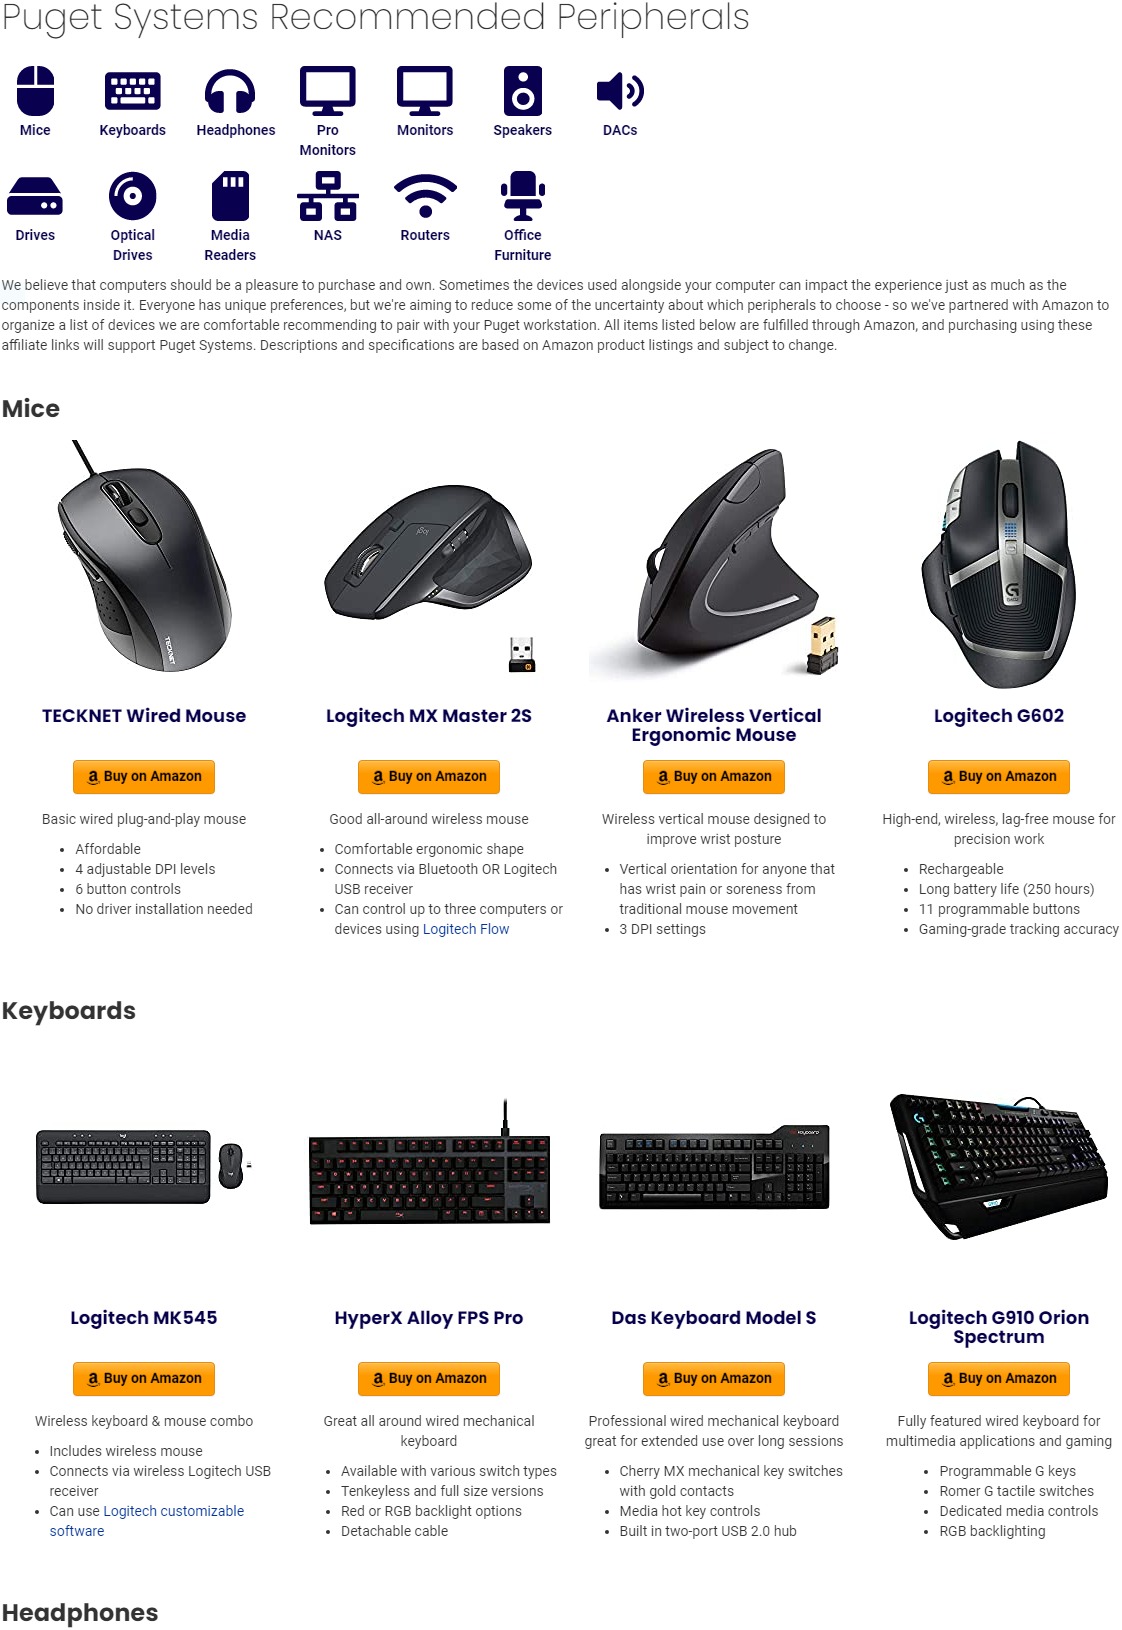 Puget Systems Recommended Third Party Peripherals Page Screenshot